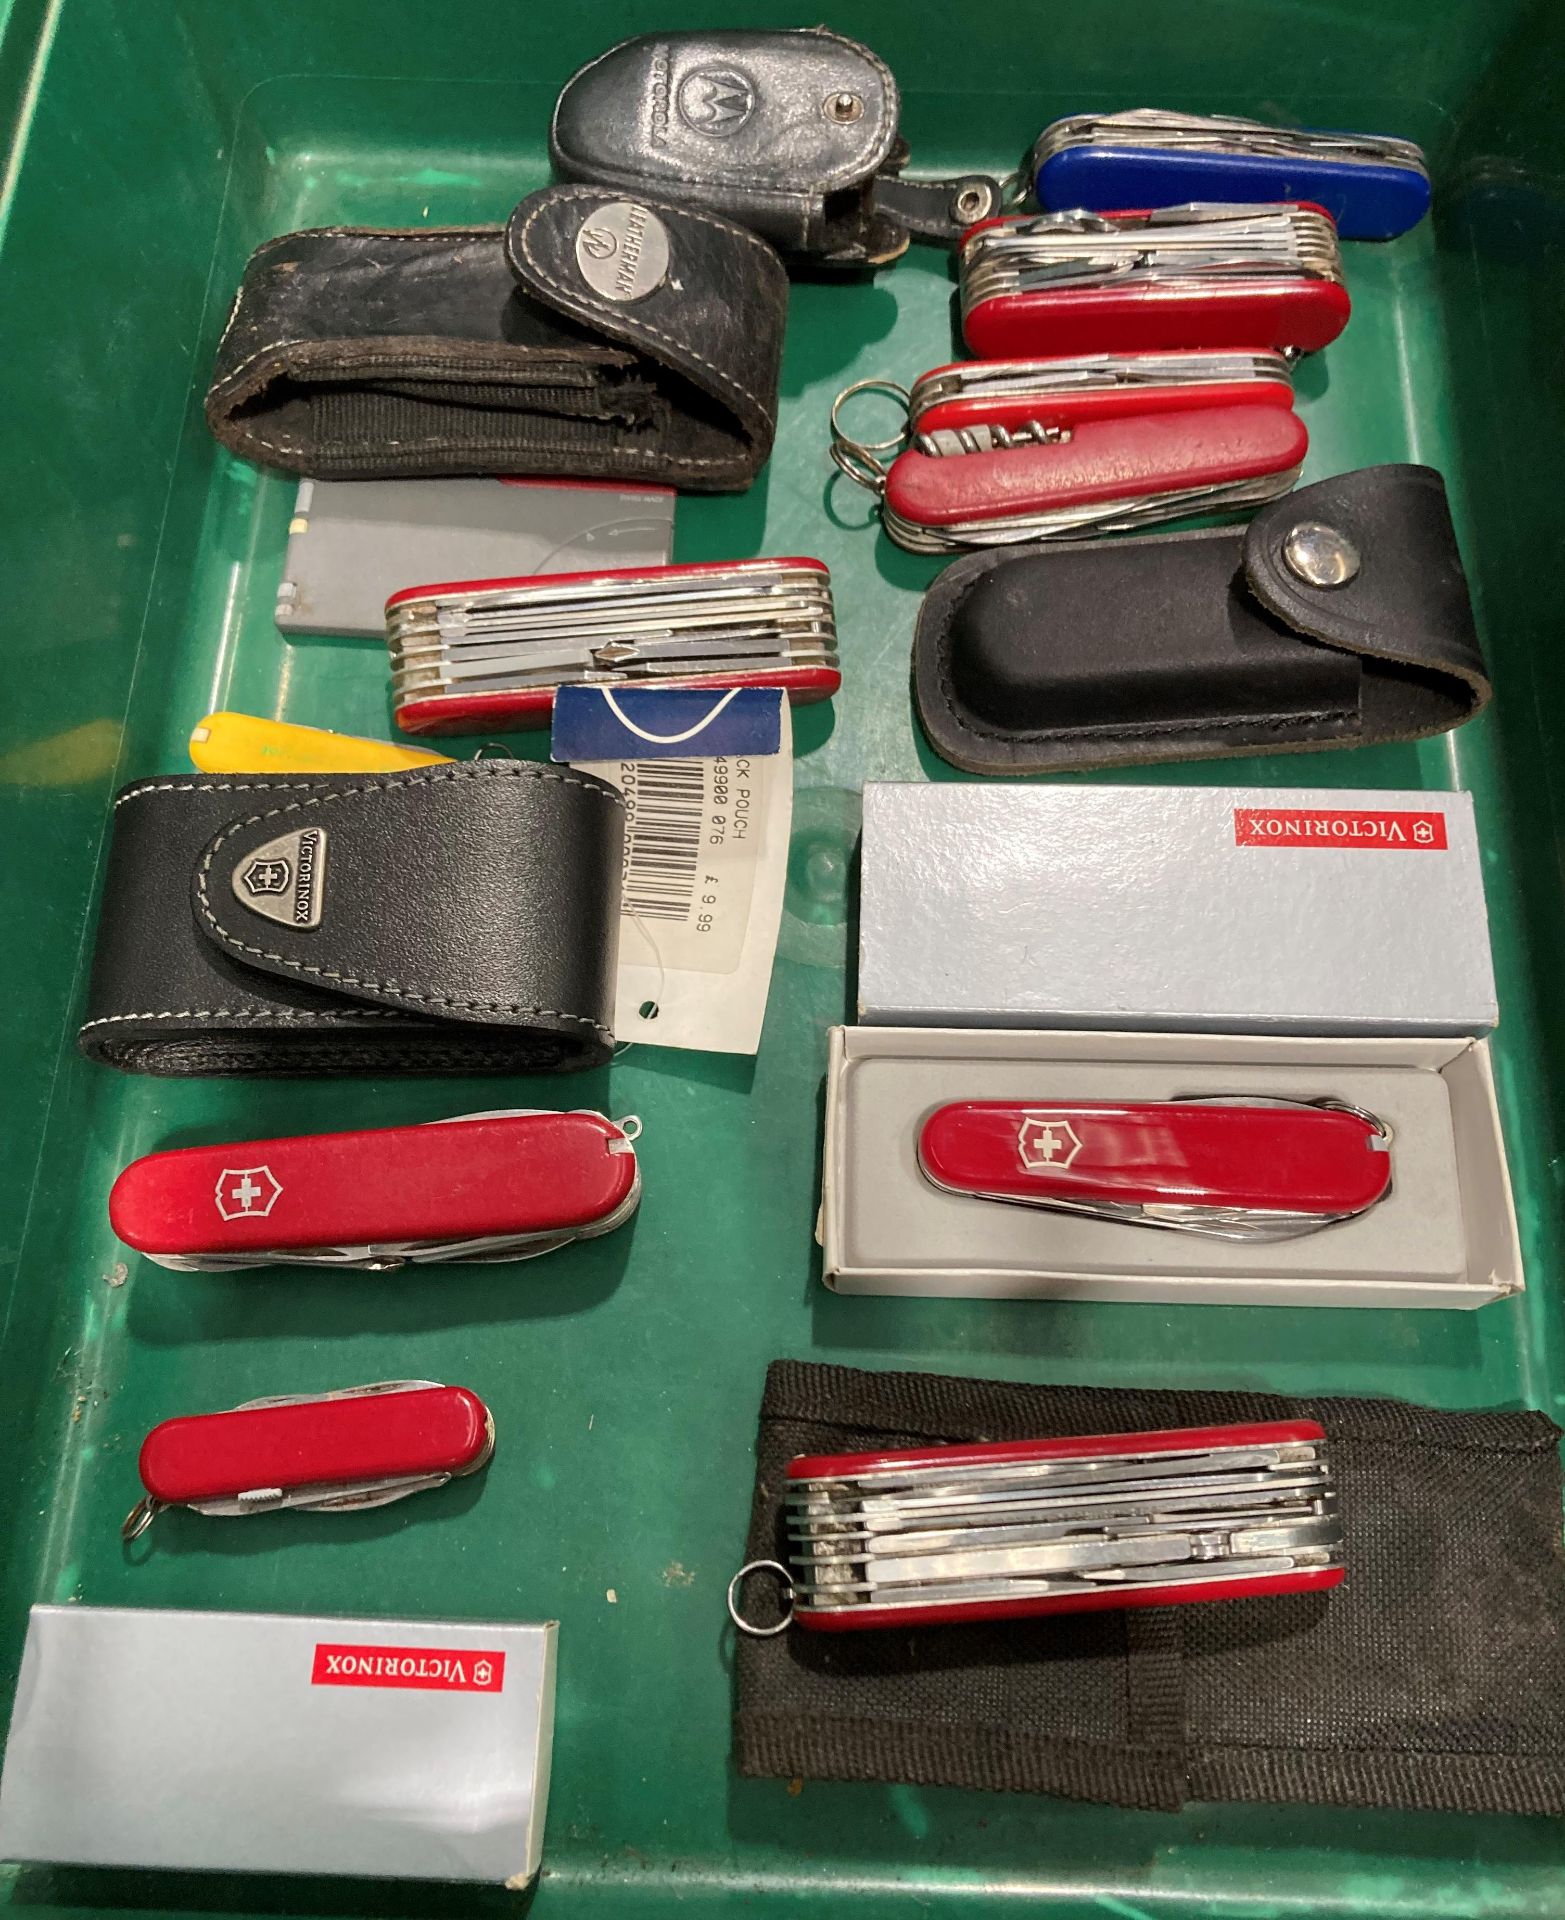 Contents to tray - ten assorted penknives by Victorinox, etc.